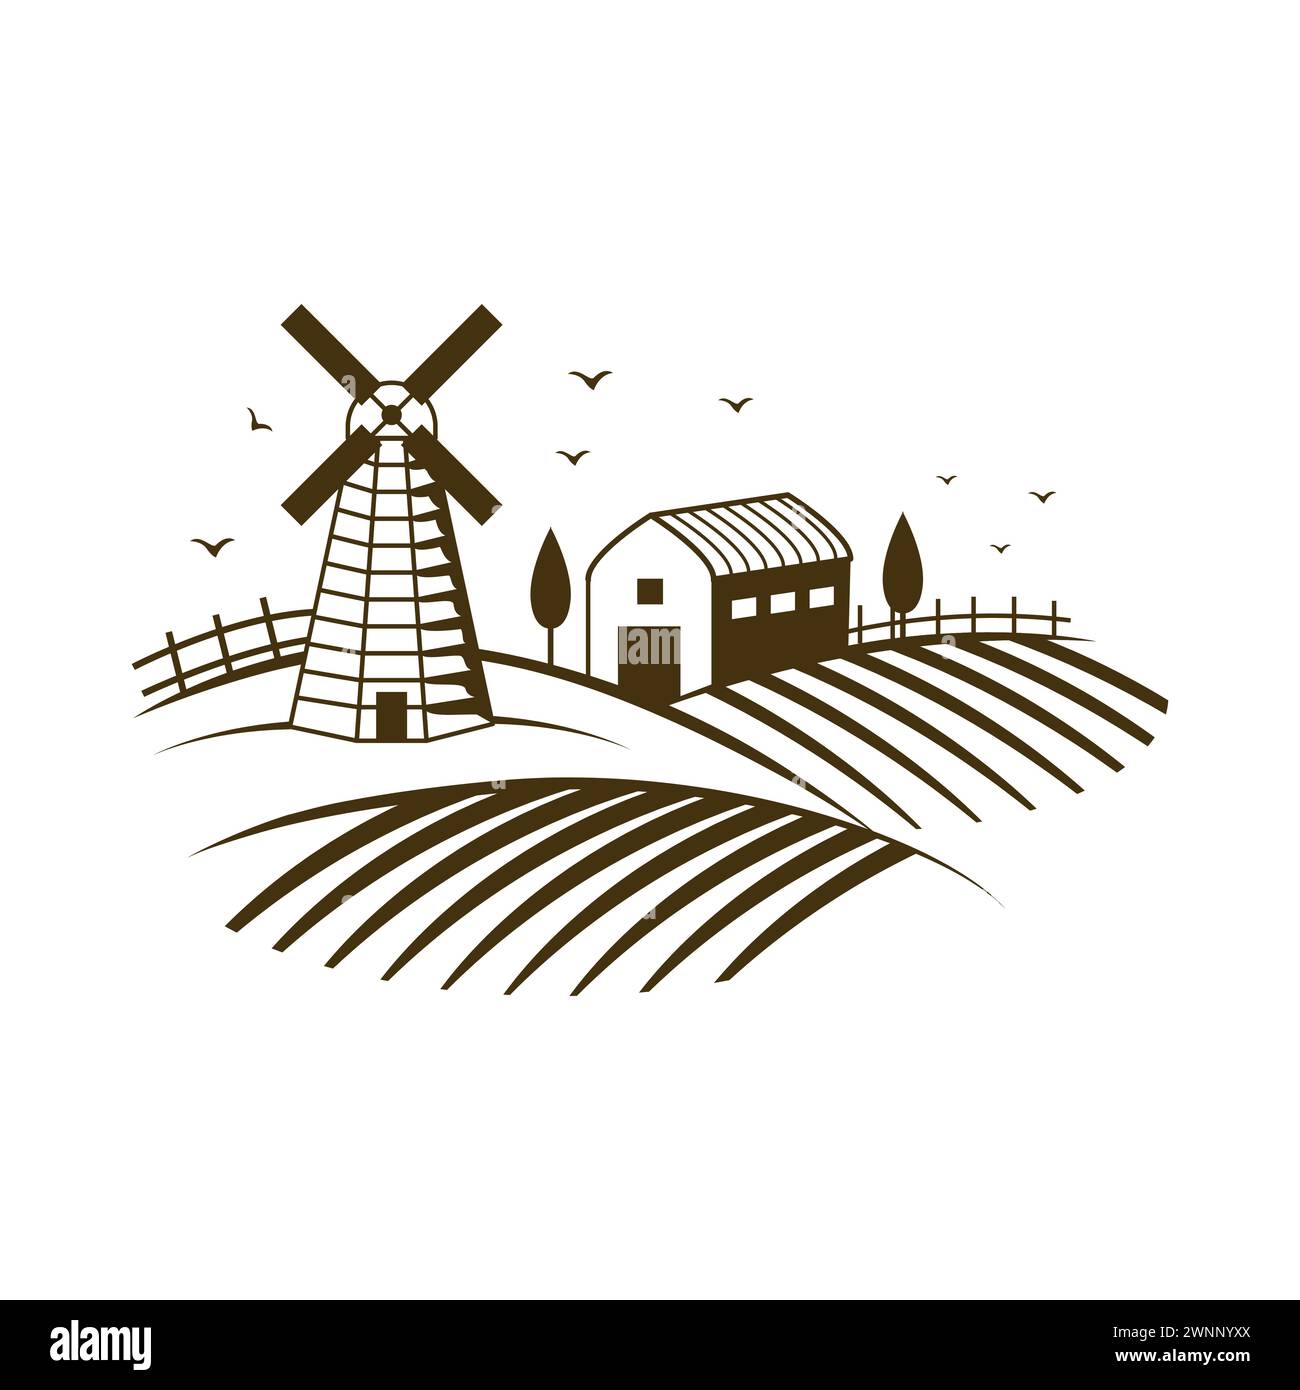 Rural landscape with windmill for vintage bakery and houses on hills vector illustration Stock Vector